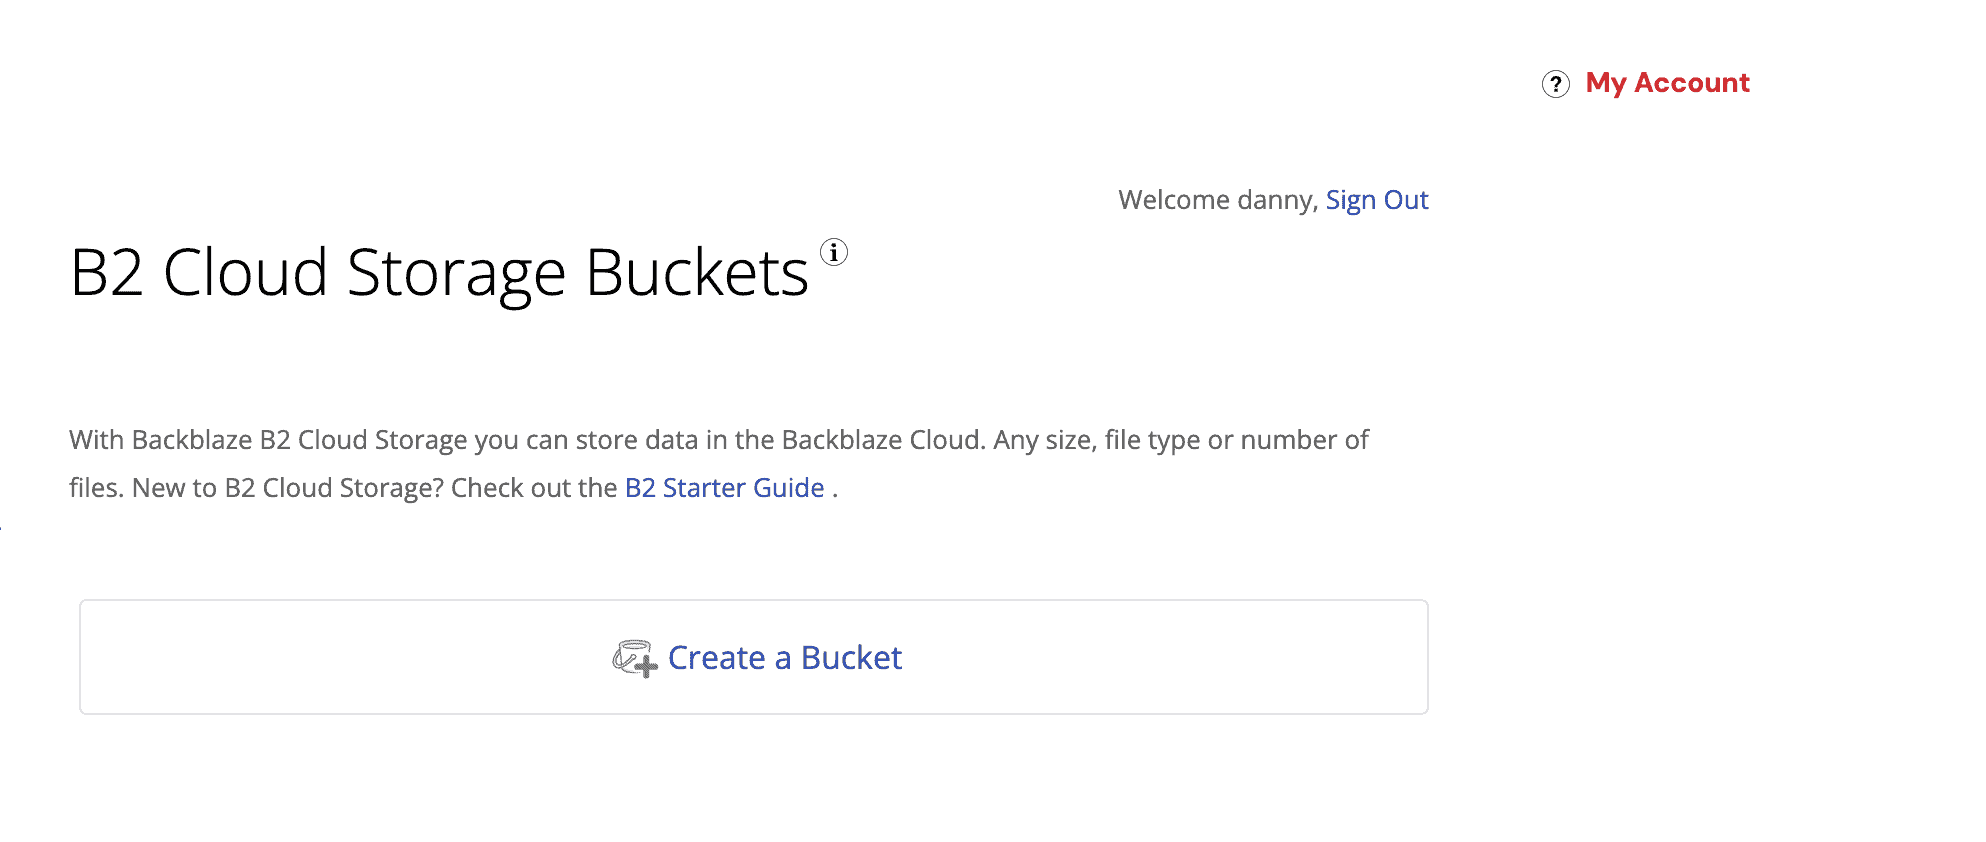 The option to create a bucket in Backblaze